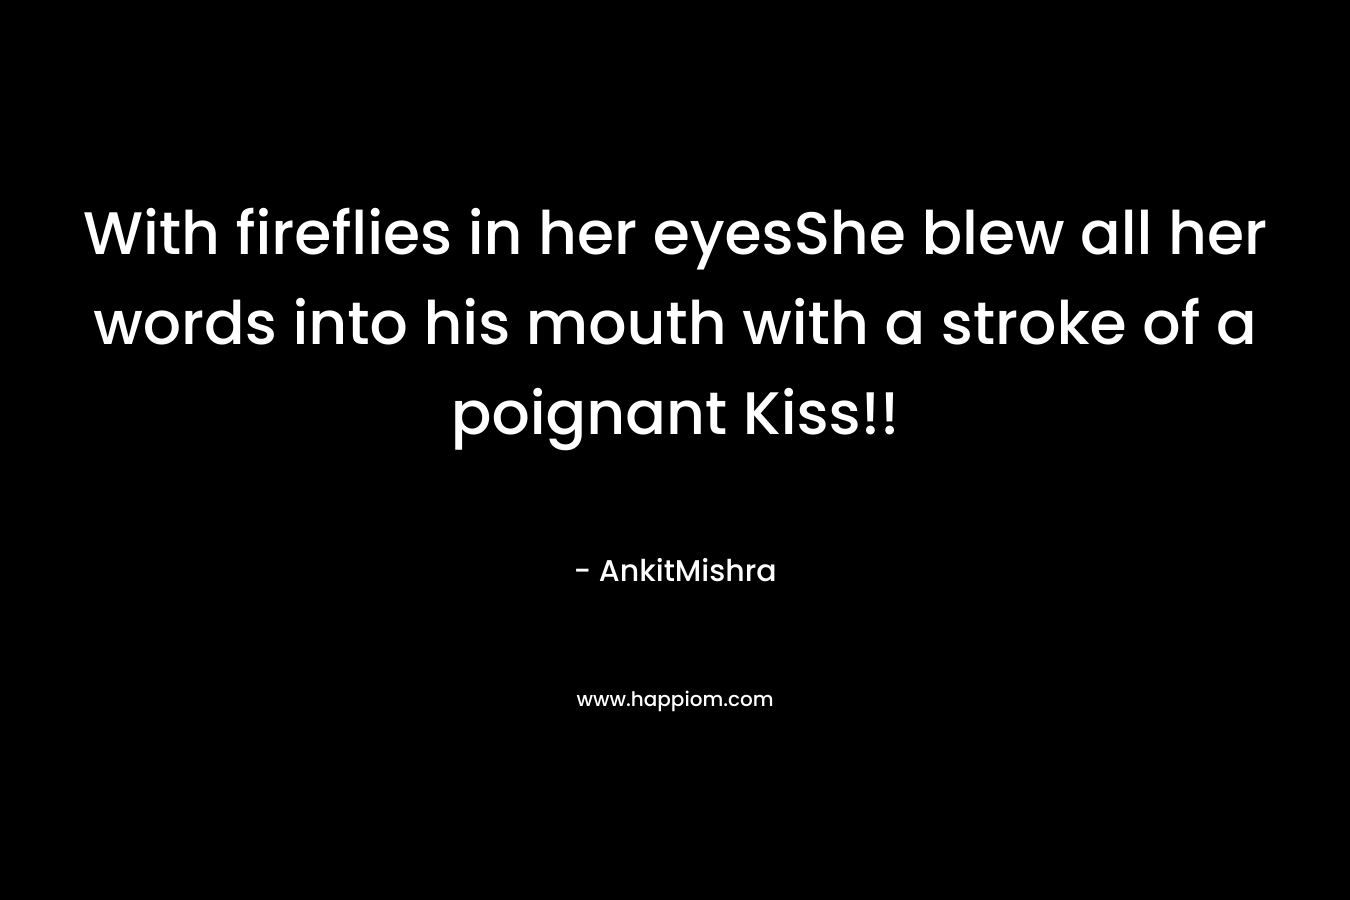 With fireflies in her eyesShe blew all her words into his mouth with a stroke of a poignant Kiss!! – AnkitMishra